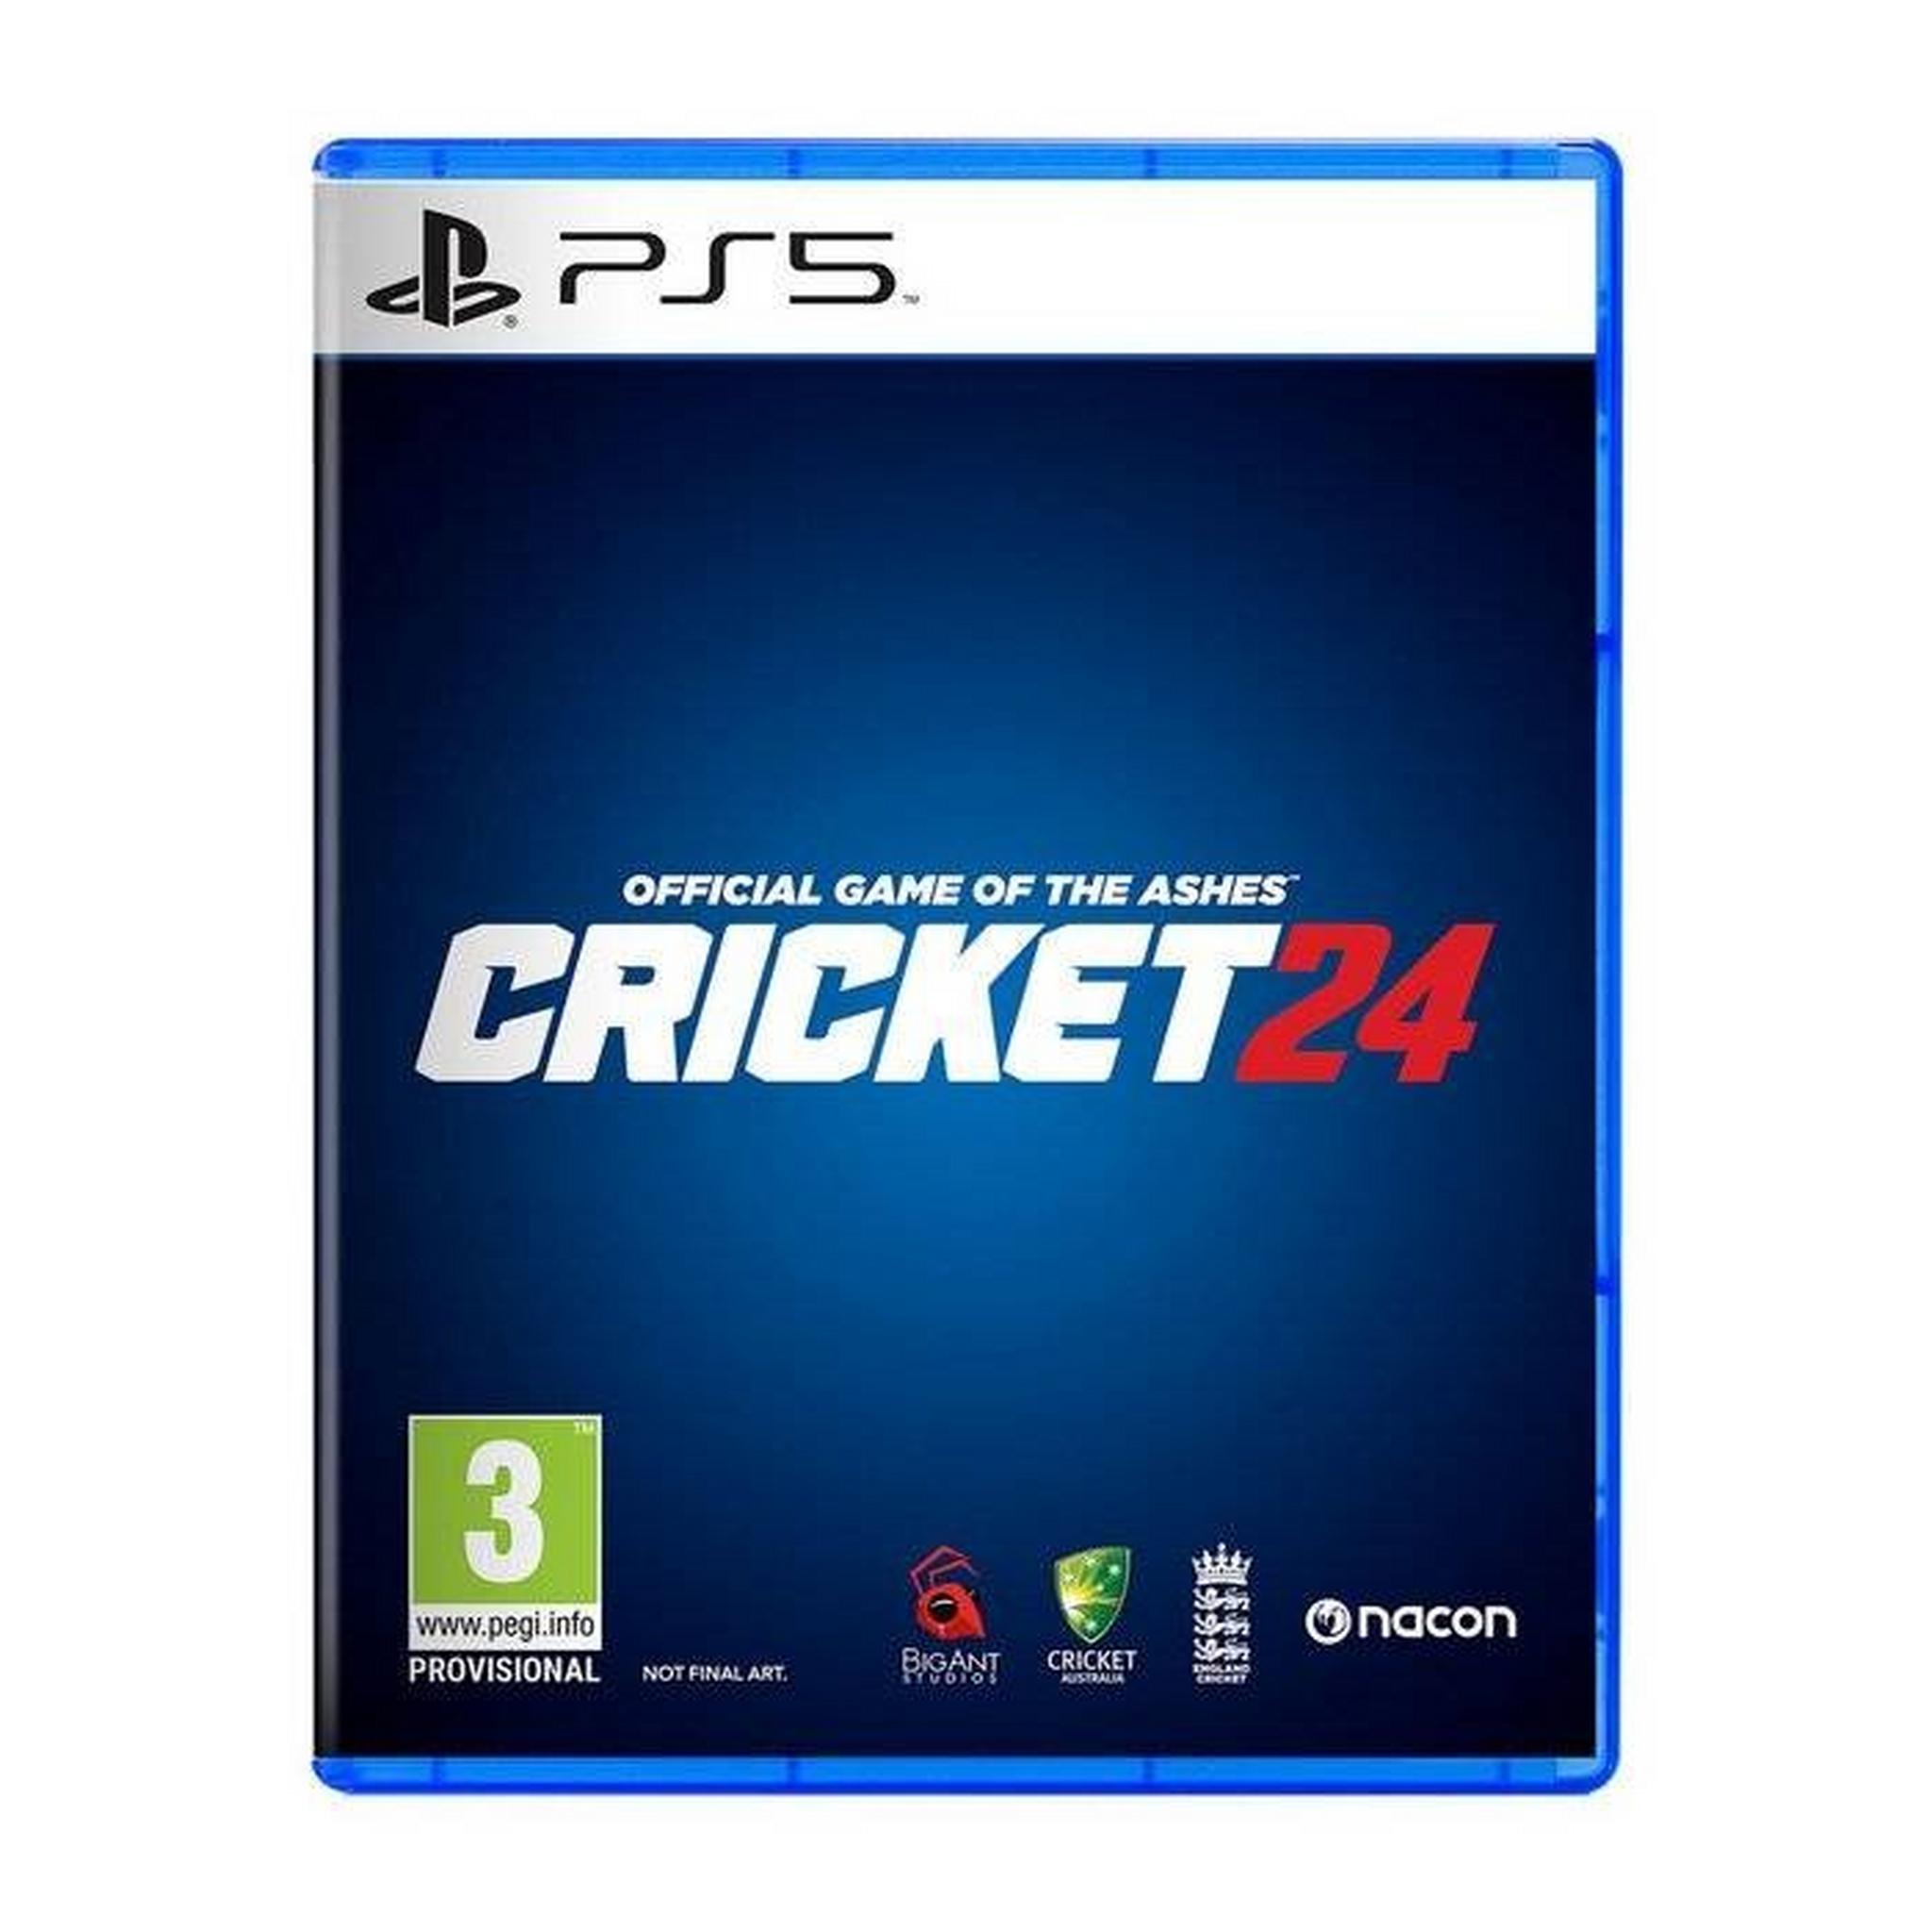 Sony Cricket 24 Official Game of The Ashes, PS5-CRKT24 - PlayStation 5 Game